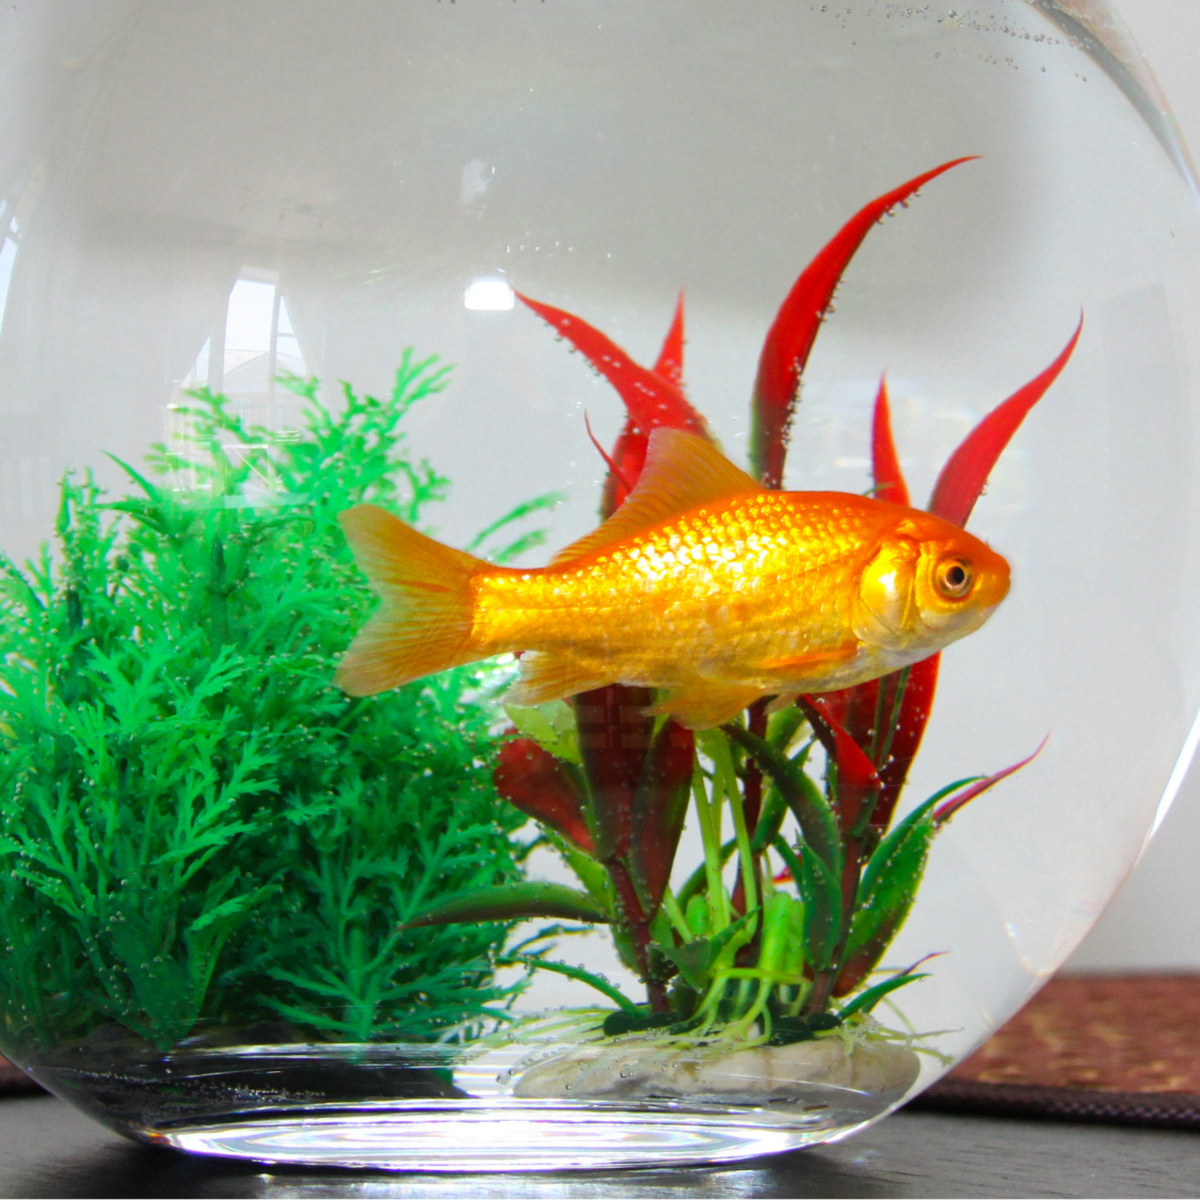 Caring for Your Goldfish in a Fish Bowl Without an Air Pump - PetHelpful